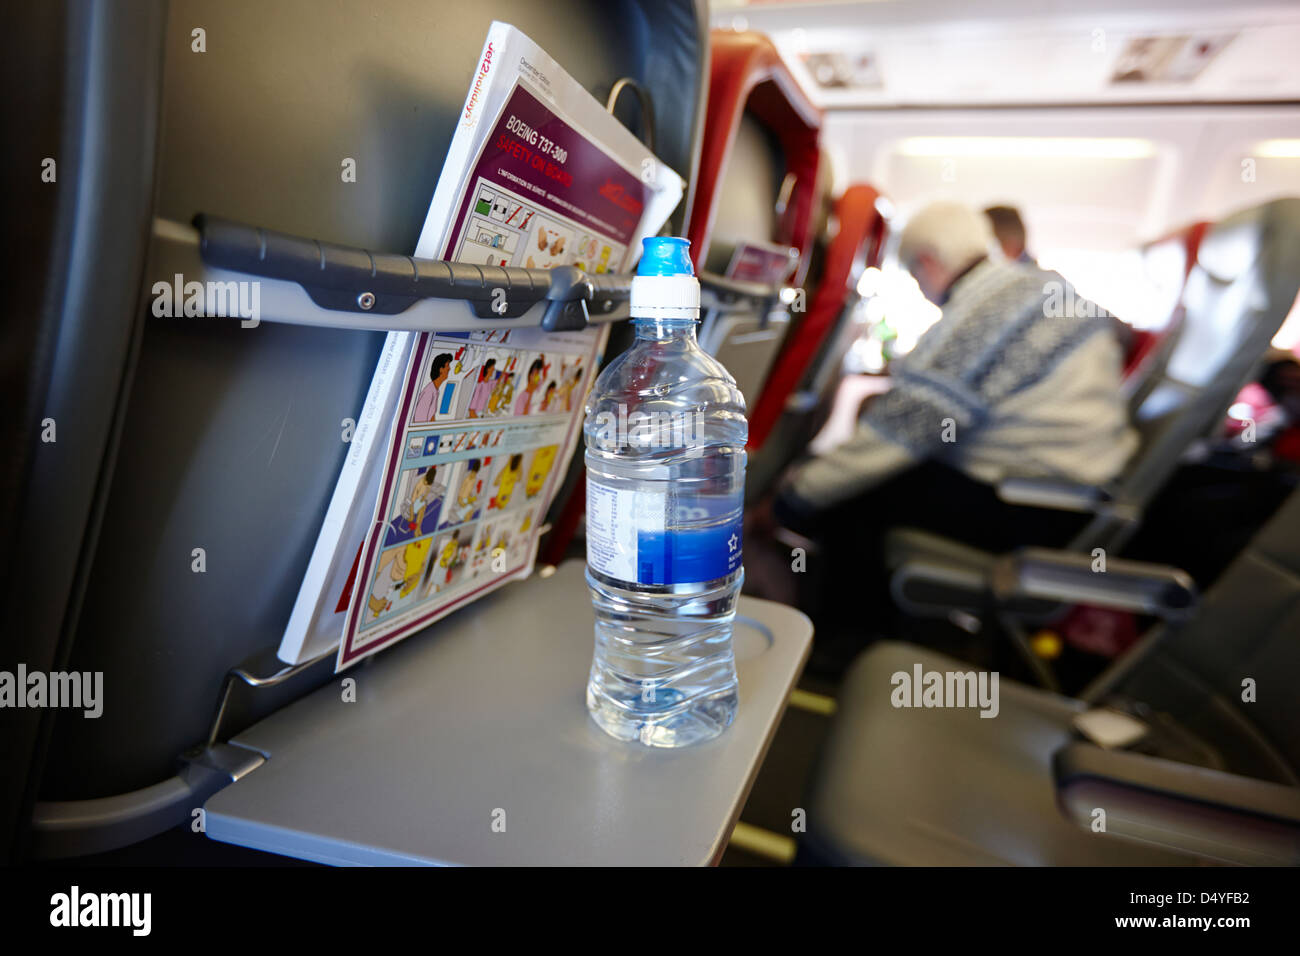 bottle of water on tray table interior of jet2 aircraft passenger cabin in flight europe Stock Photo